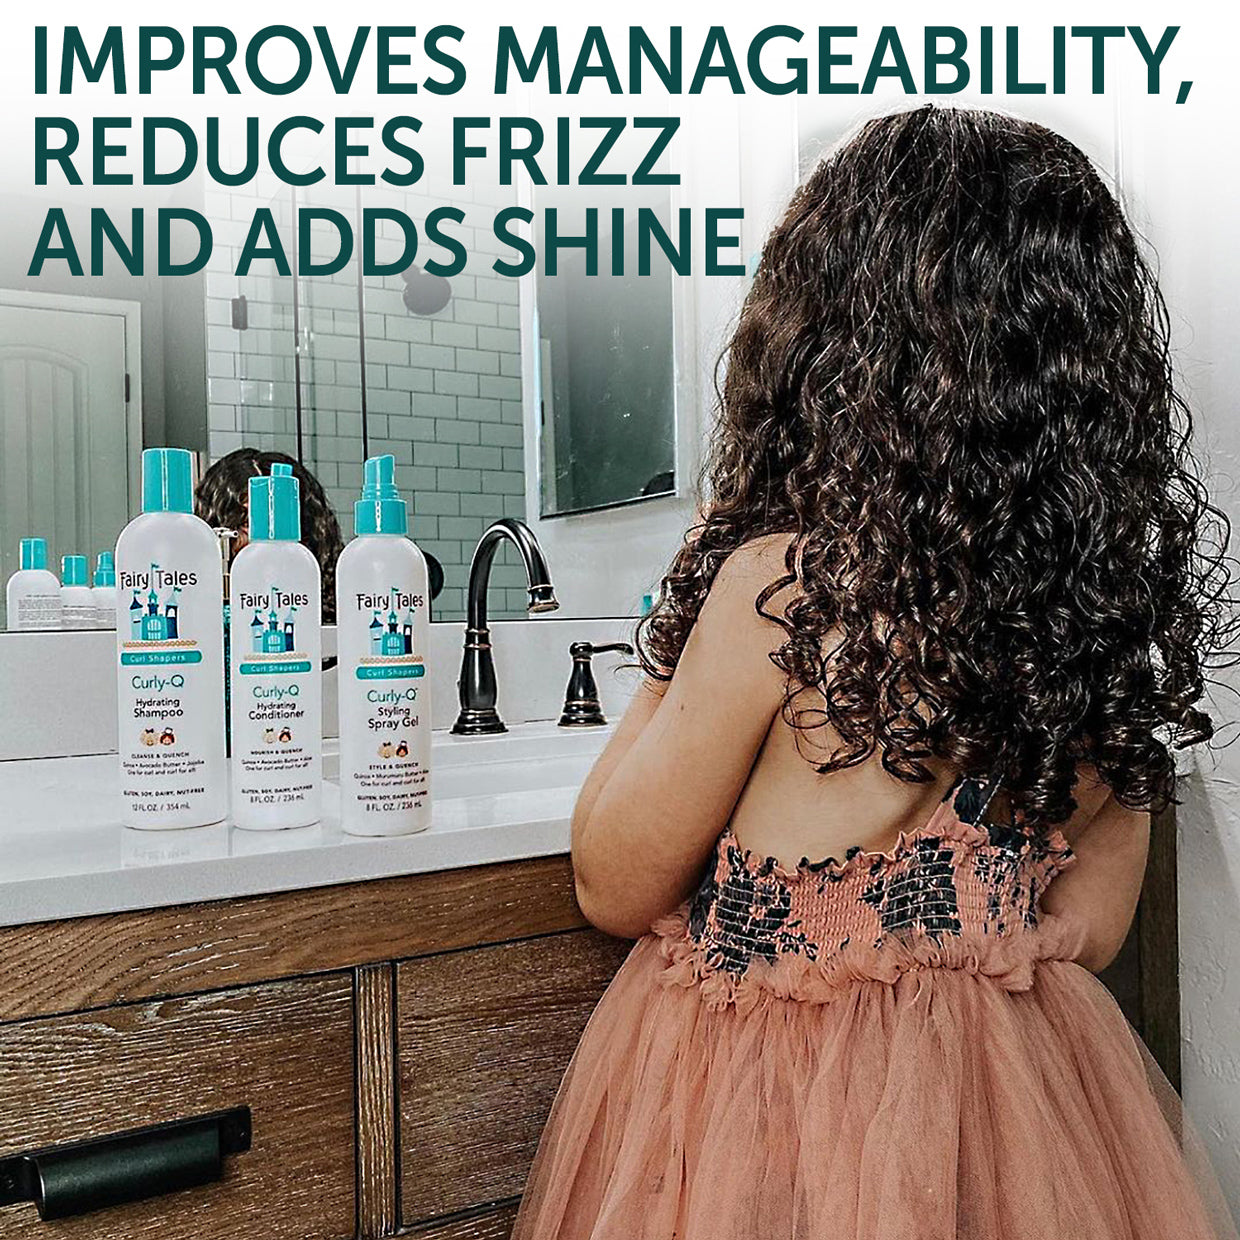 Curly-Q™ Kids Shampoo for Curly Hair